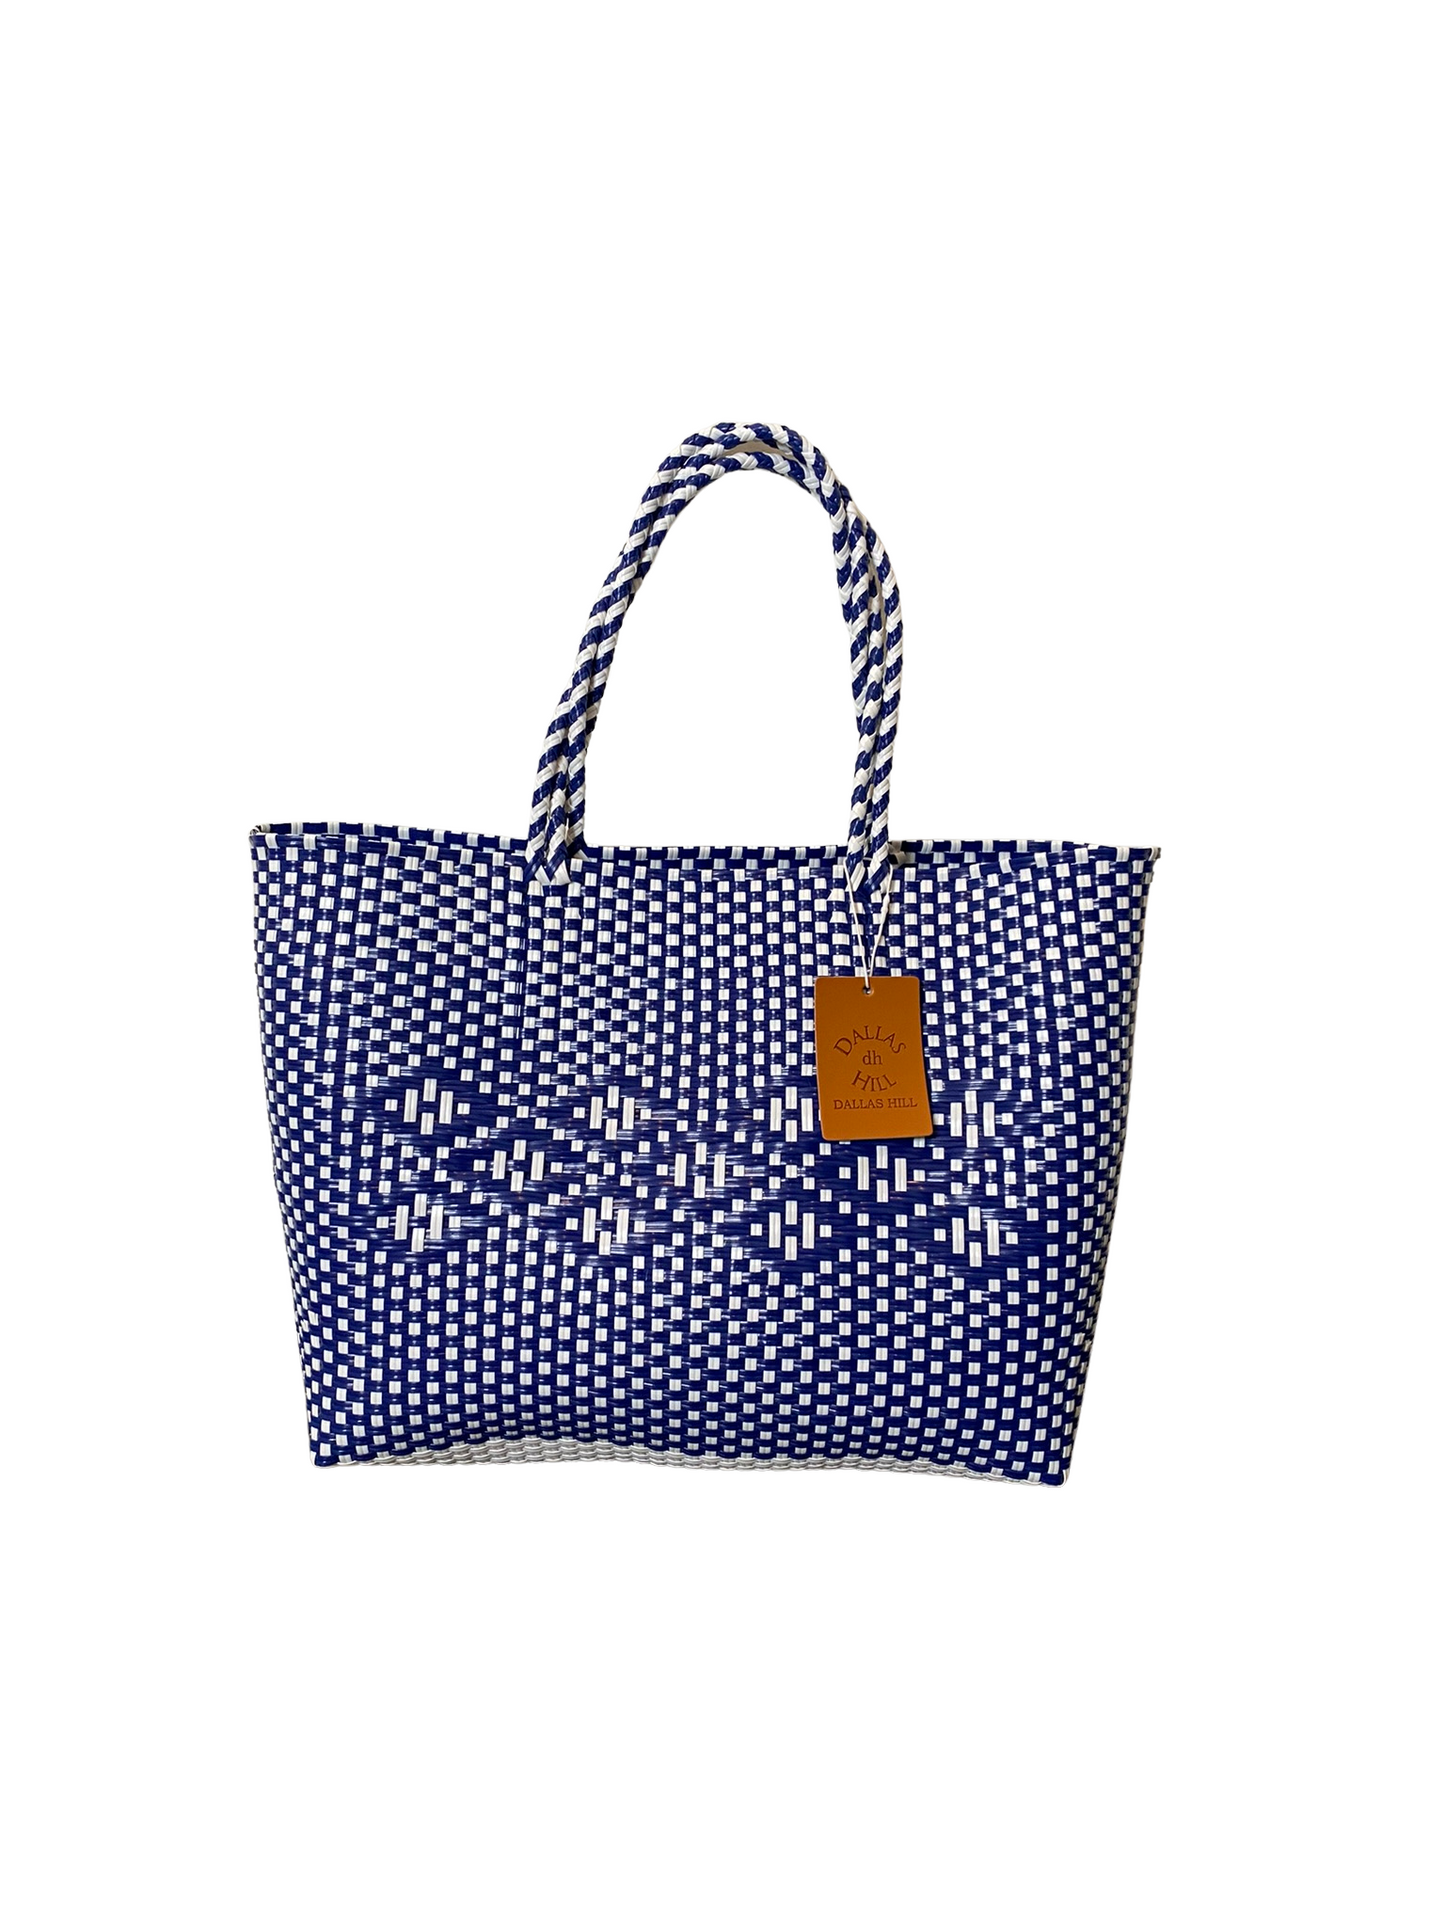 Woven Super Tote, Handwoven Recycled Plastic Tote, Woven Bag, Beach Bag, Summer Bag Navy & White